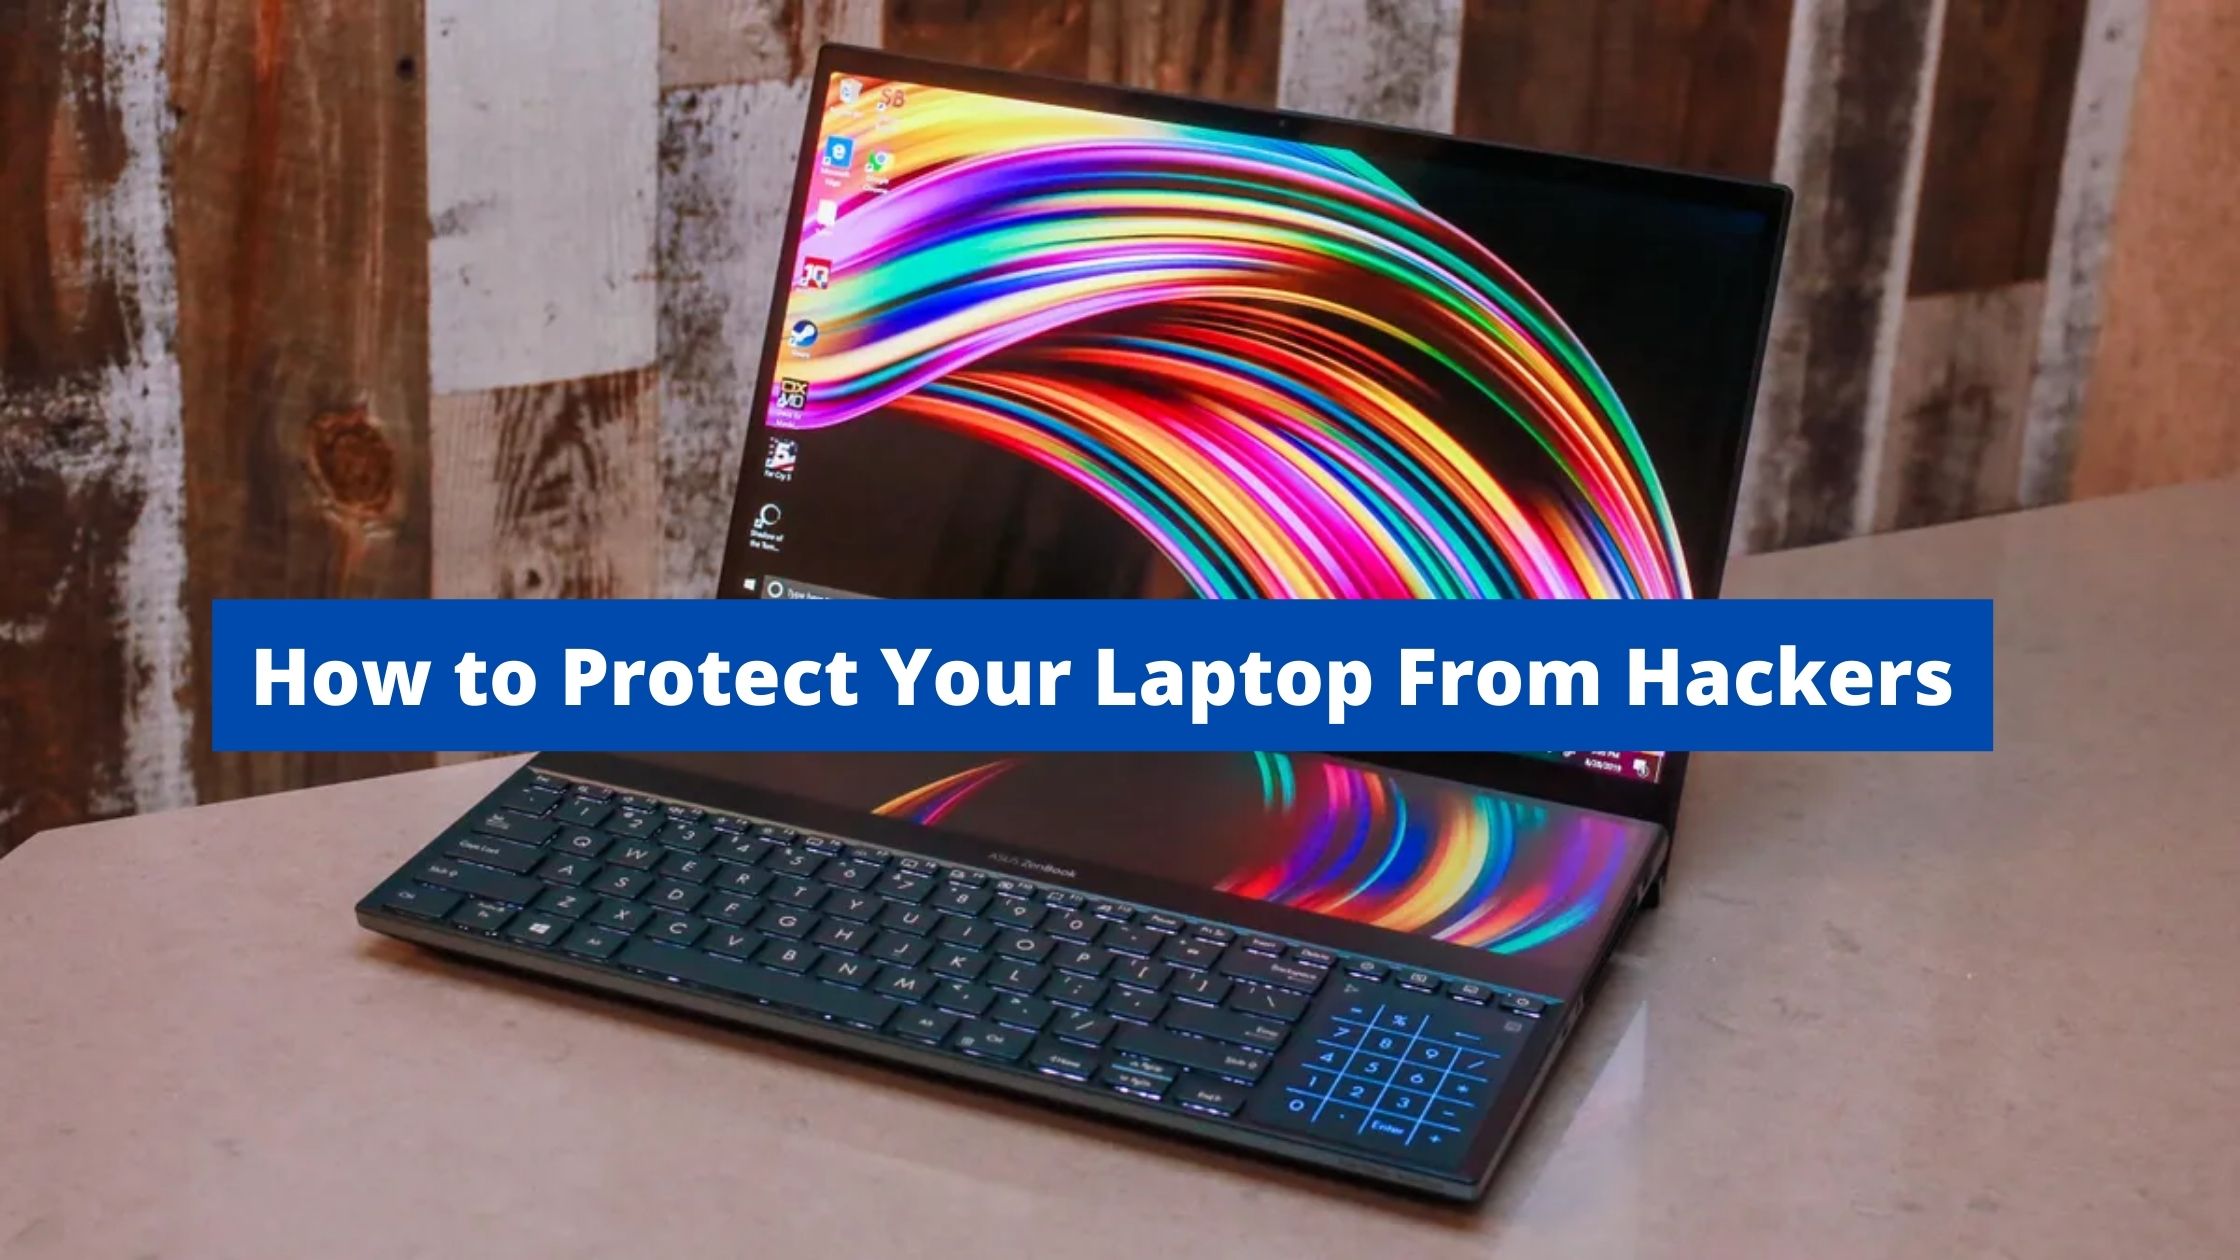 How to Protect Your Laptop From Hackers in 2022